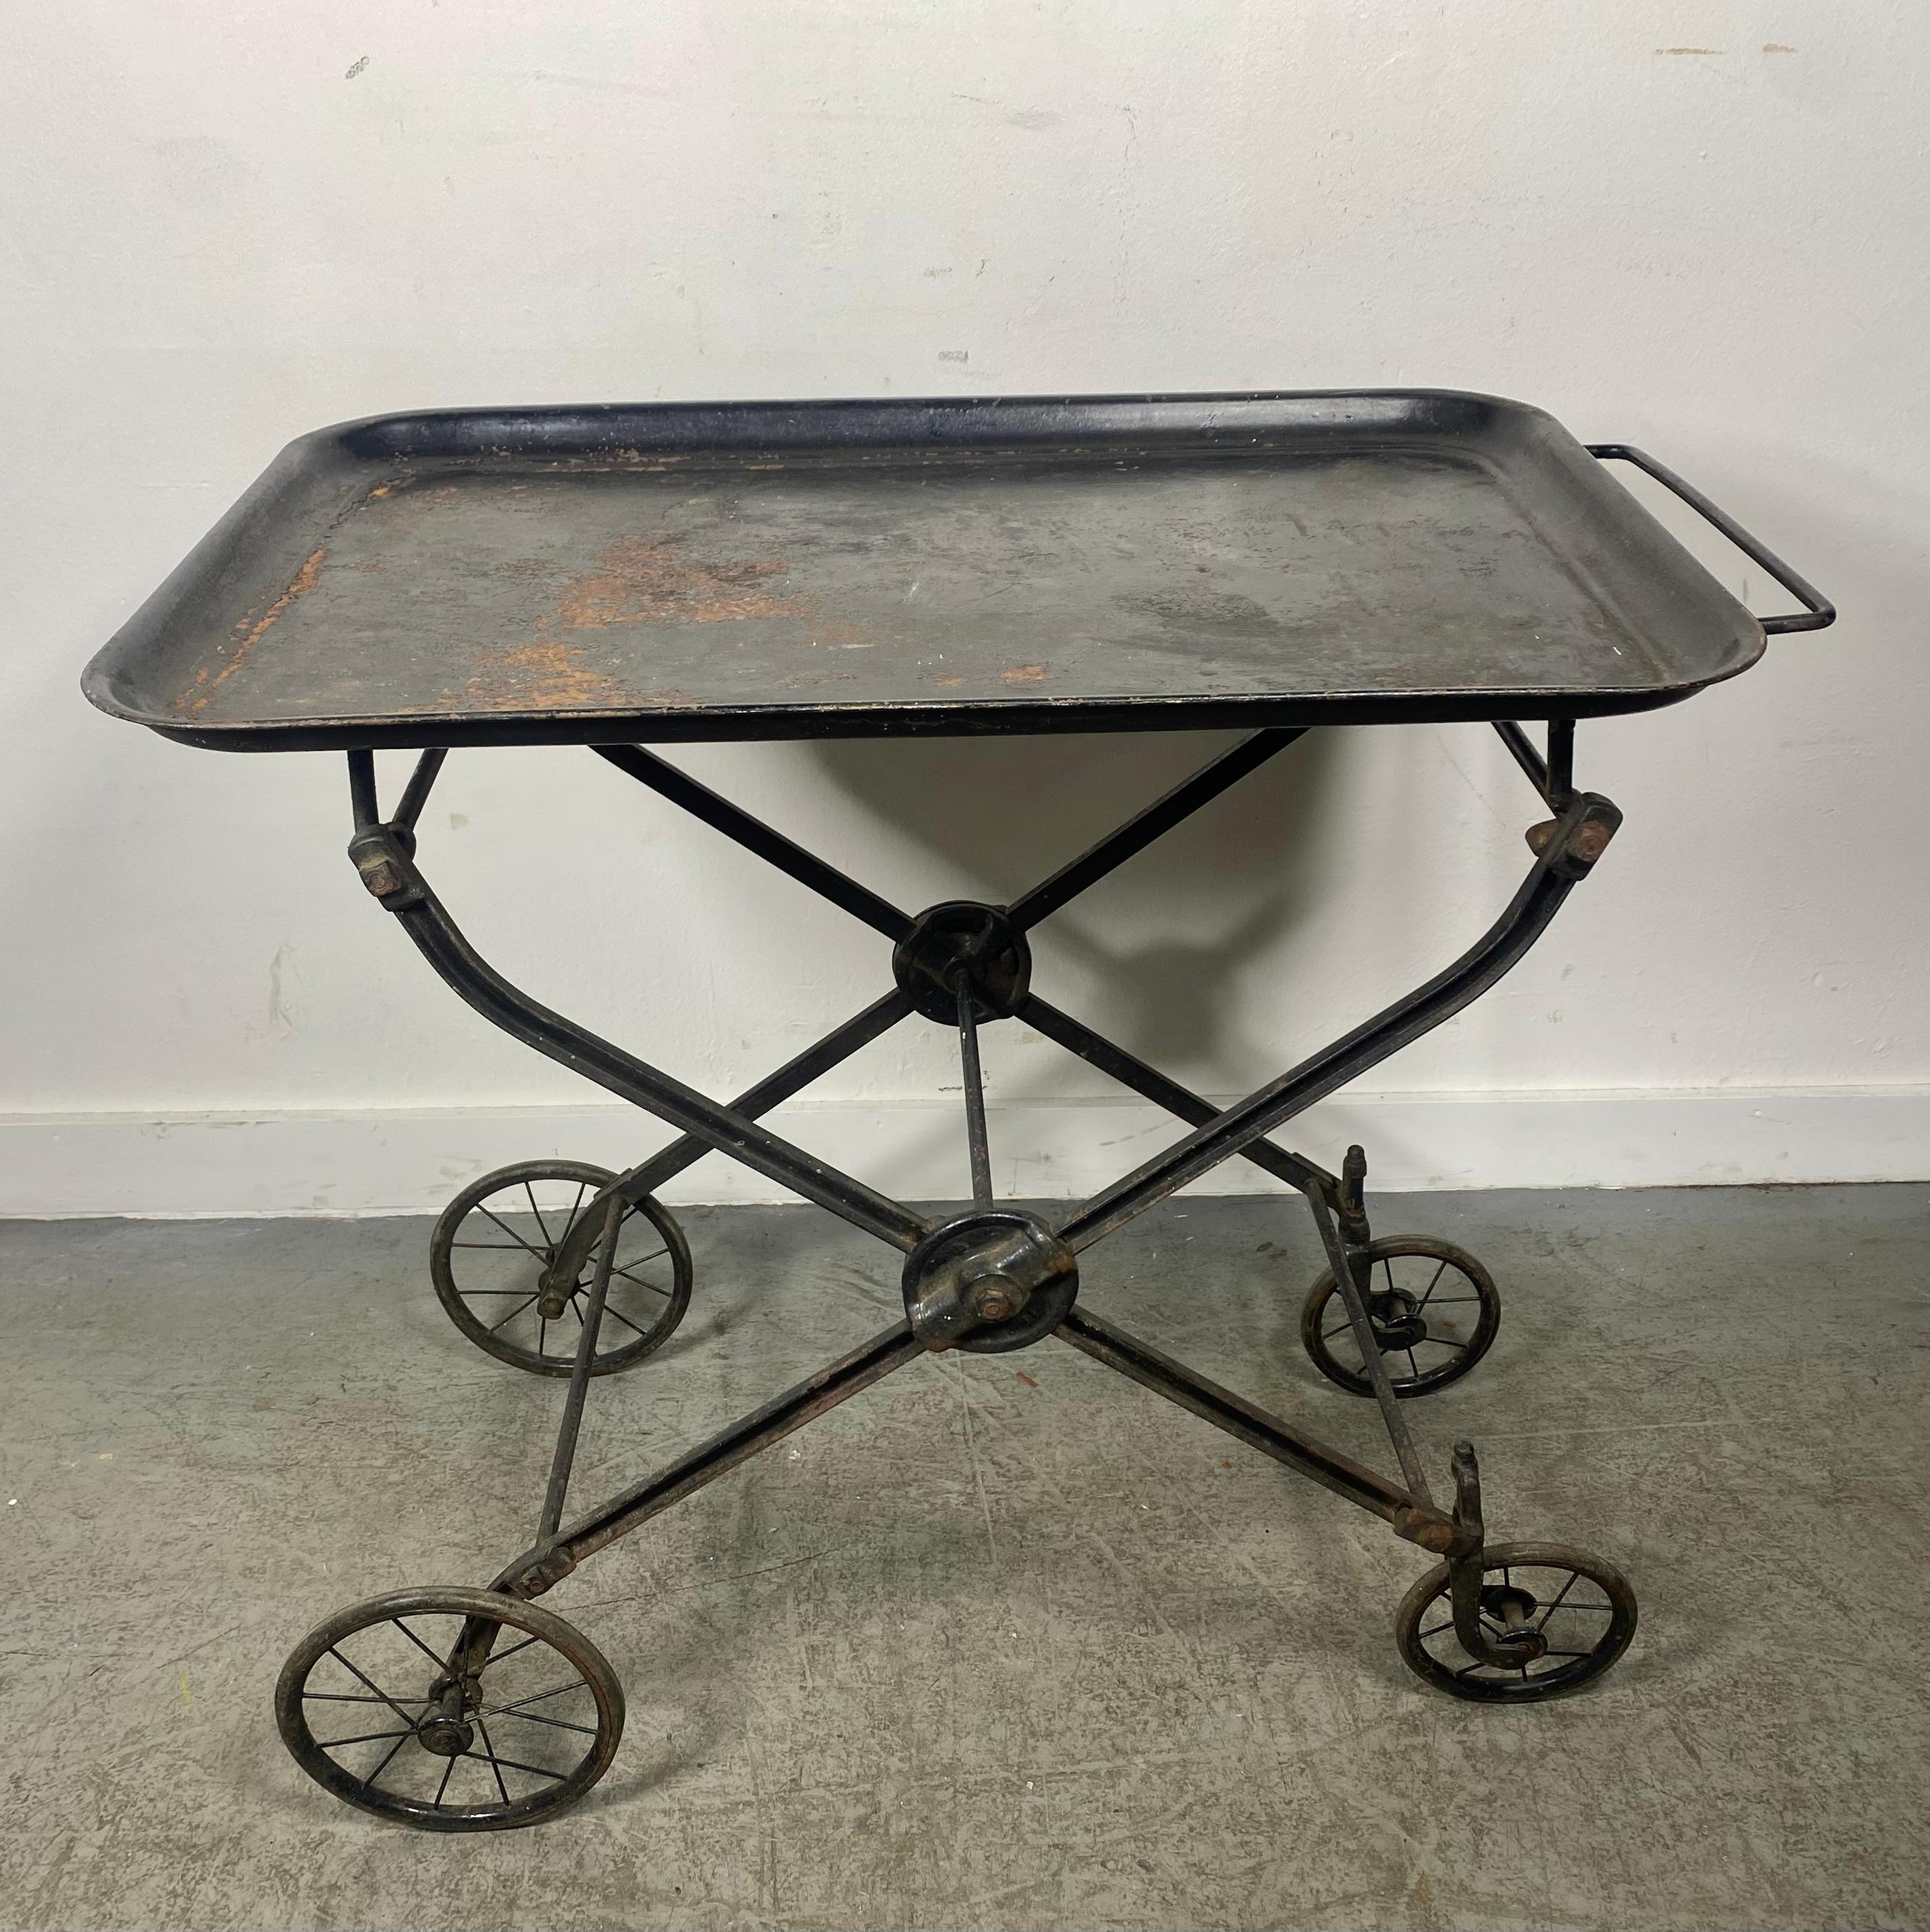 Handled rolling and folding iron hotel beverage trolley, serving cart, dry bar. Tea. Coffee. Plants. Display. Featuring a rectangular larger lipped tray, sturdy Iron crossbar and castings with spoked wheel detail. Uncommon. Industrial. Fine design.